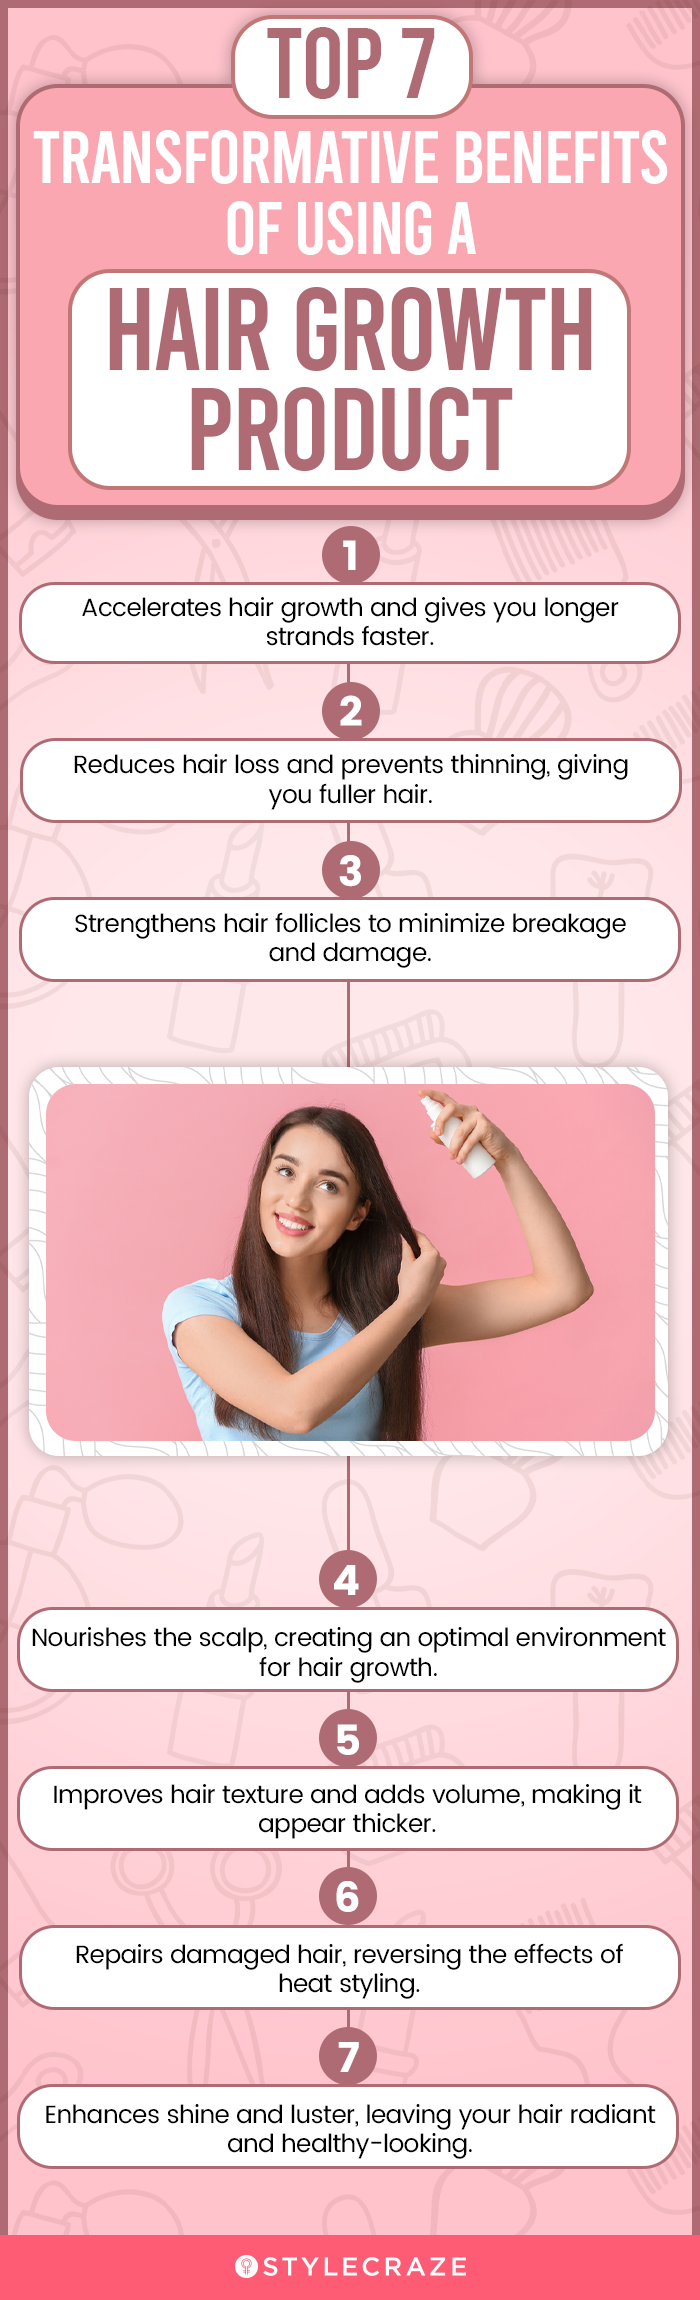 Top 7 Transformative Benefits For Using Hair Growth Products (infographic)